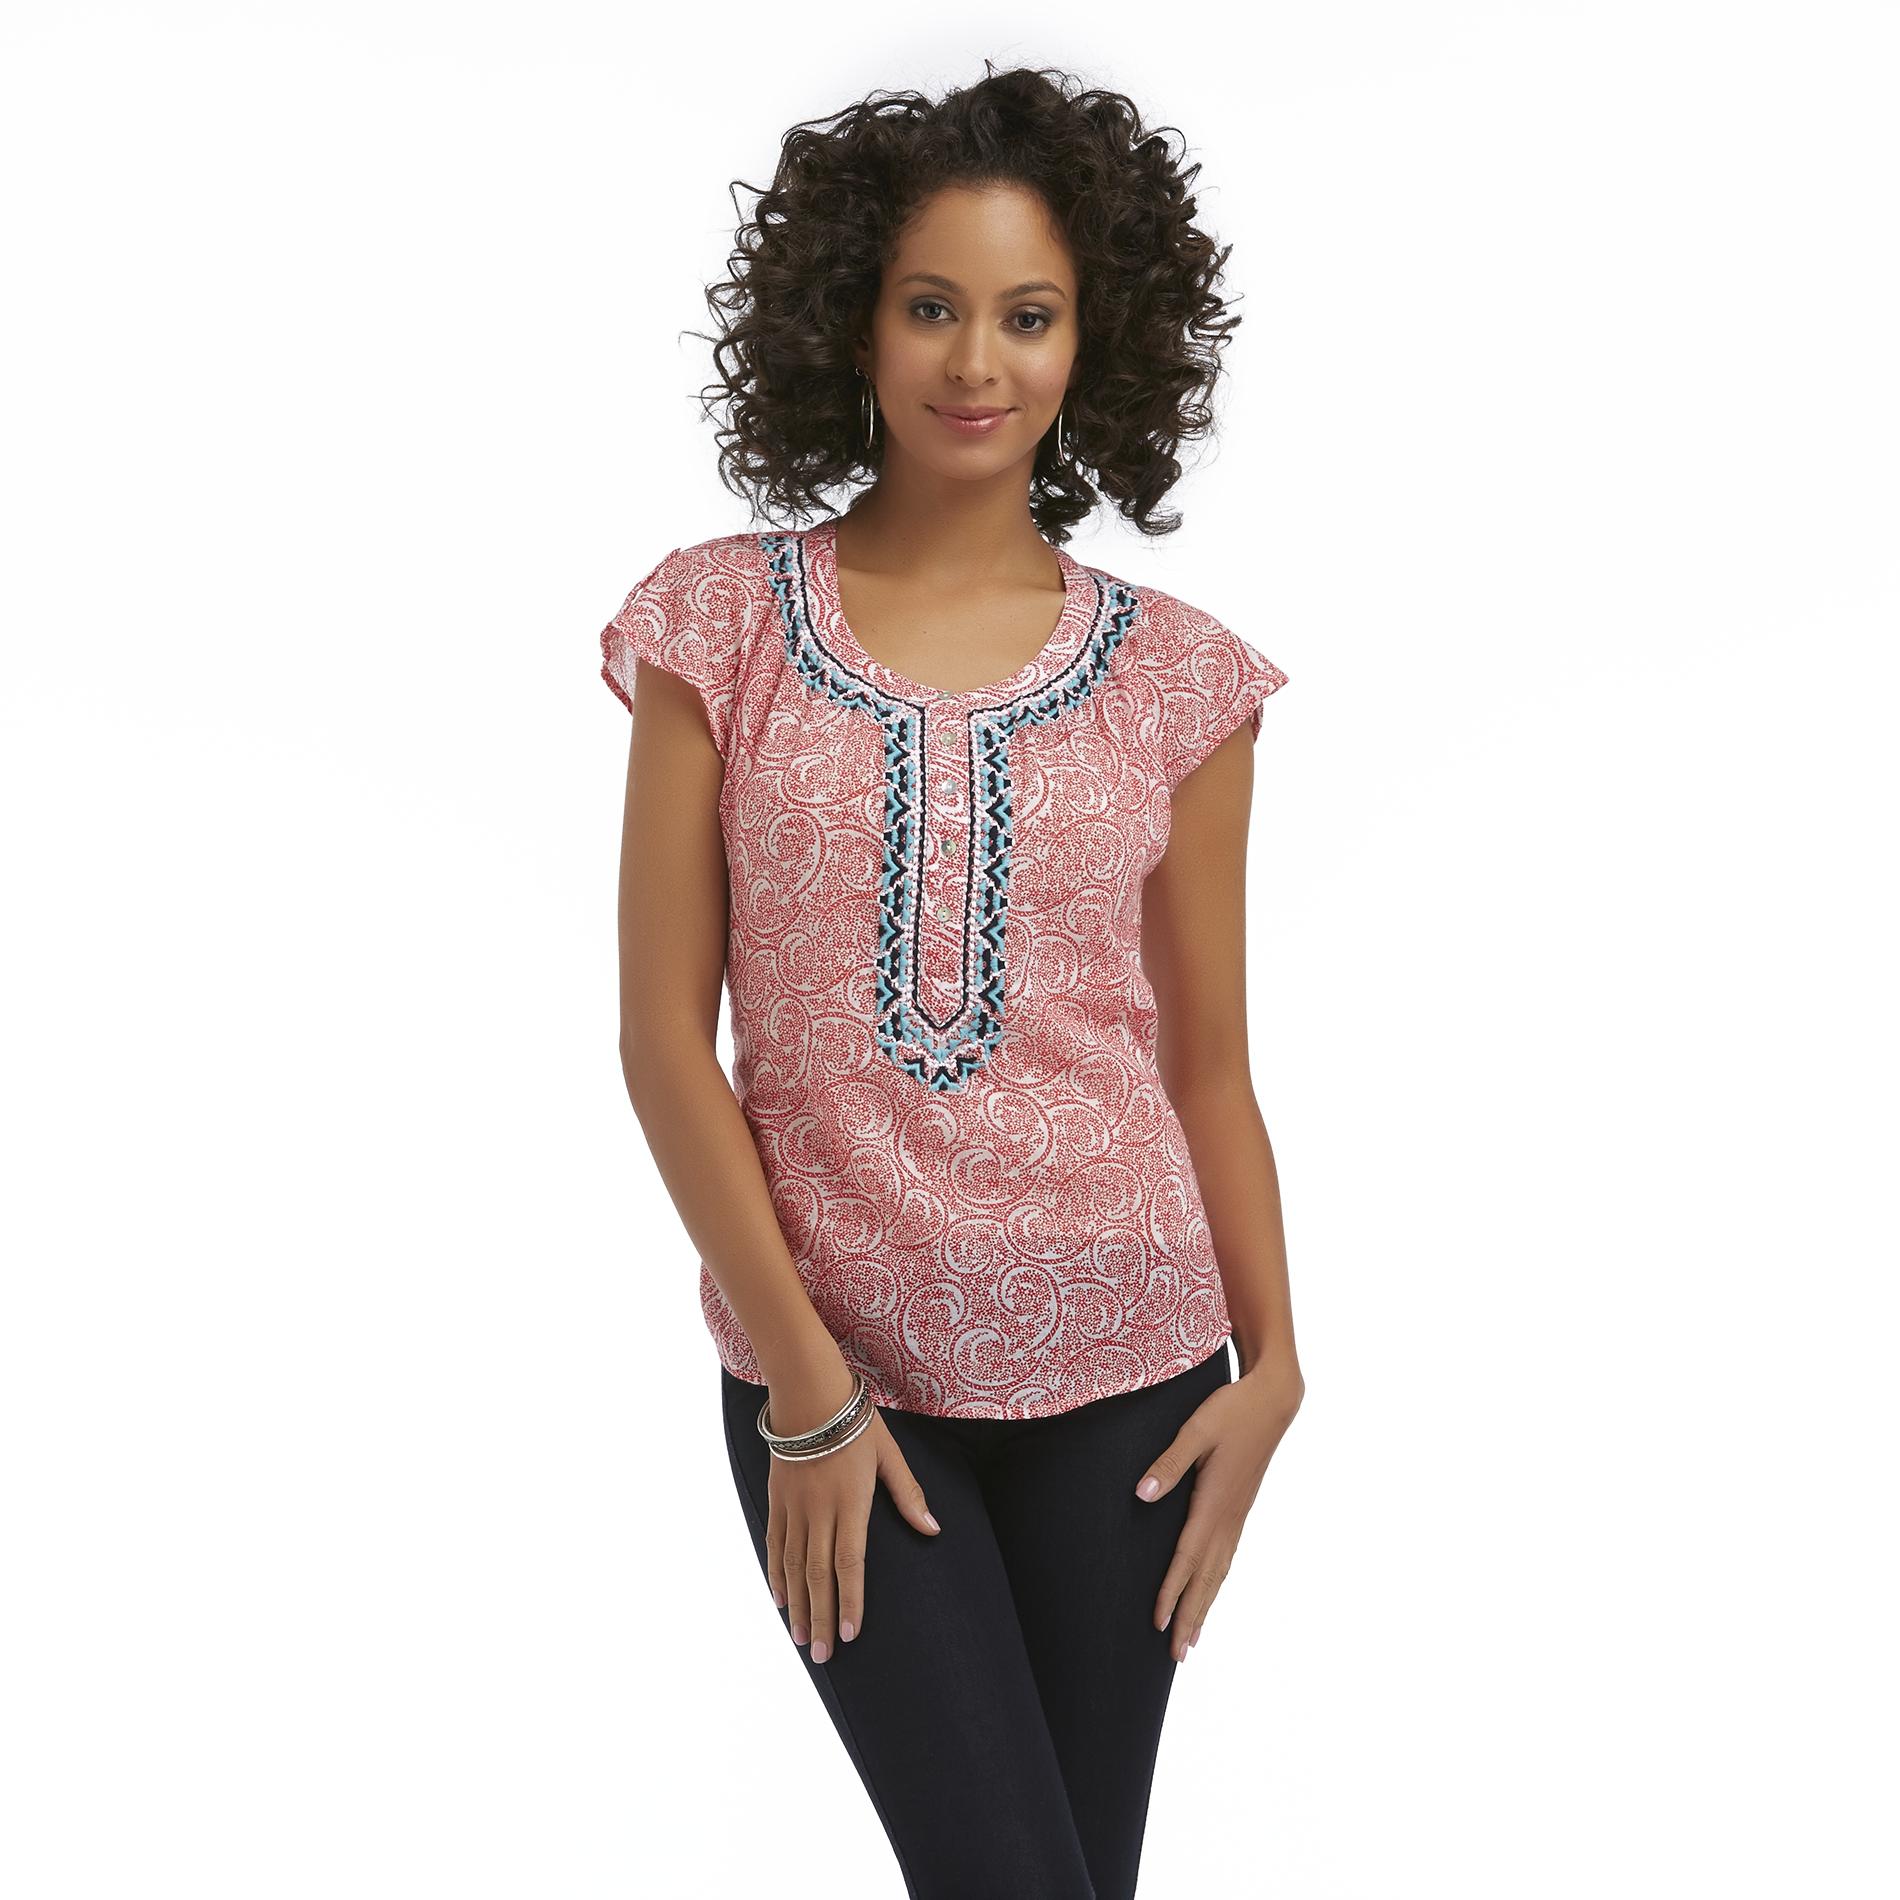 Canyon River Blues Women's Embroidered Woven Top - Floral